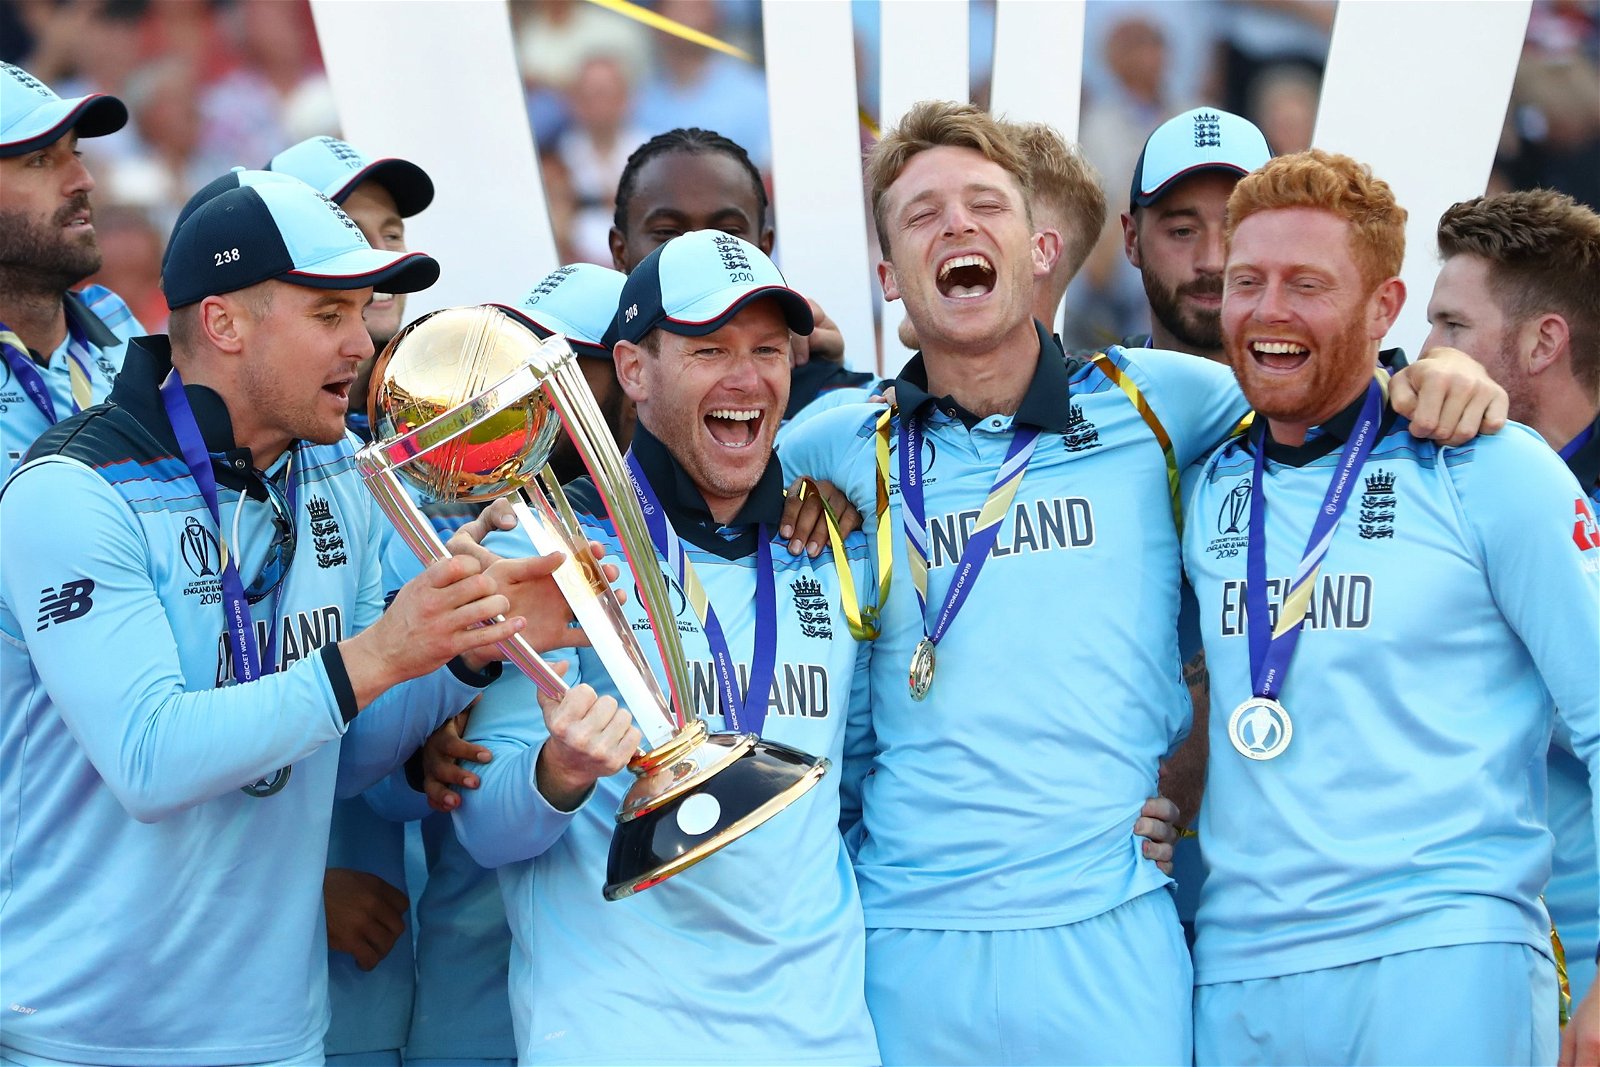 How much did ICC World Cup winner get in 2019?